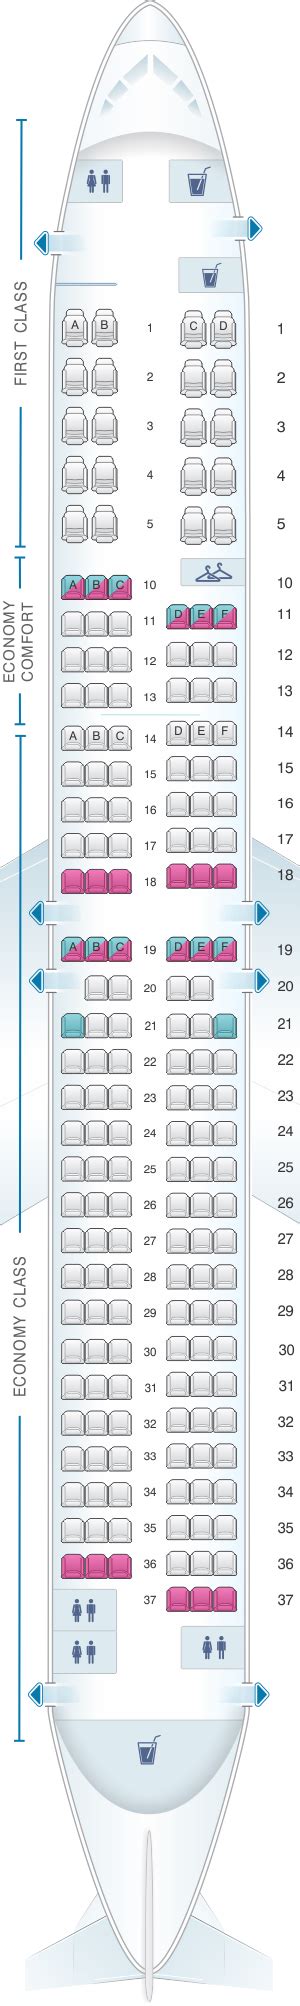 Delta 739 seat map. Submitted by SeatGuru User on 2018/05/21 for Seat 16c. There are two rows of emergency exit seats, rows 16 and 17. Plenty of legroom in both but instead of limited recline for row 16, there is NO recline at all for seats in row 16, so you will sit up straight for the full journey. Entertainment system is changing. 